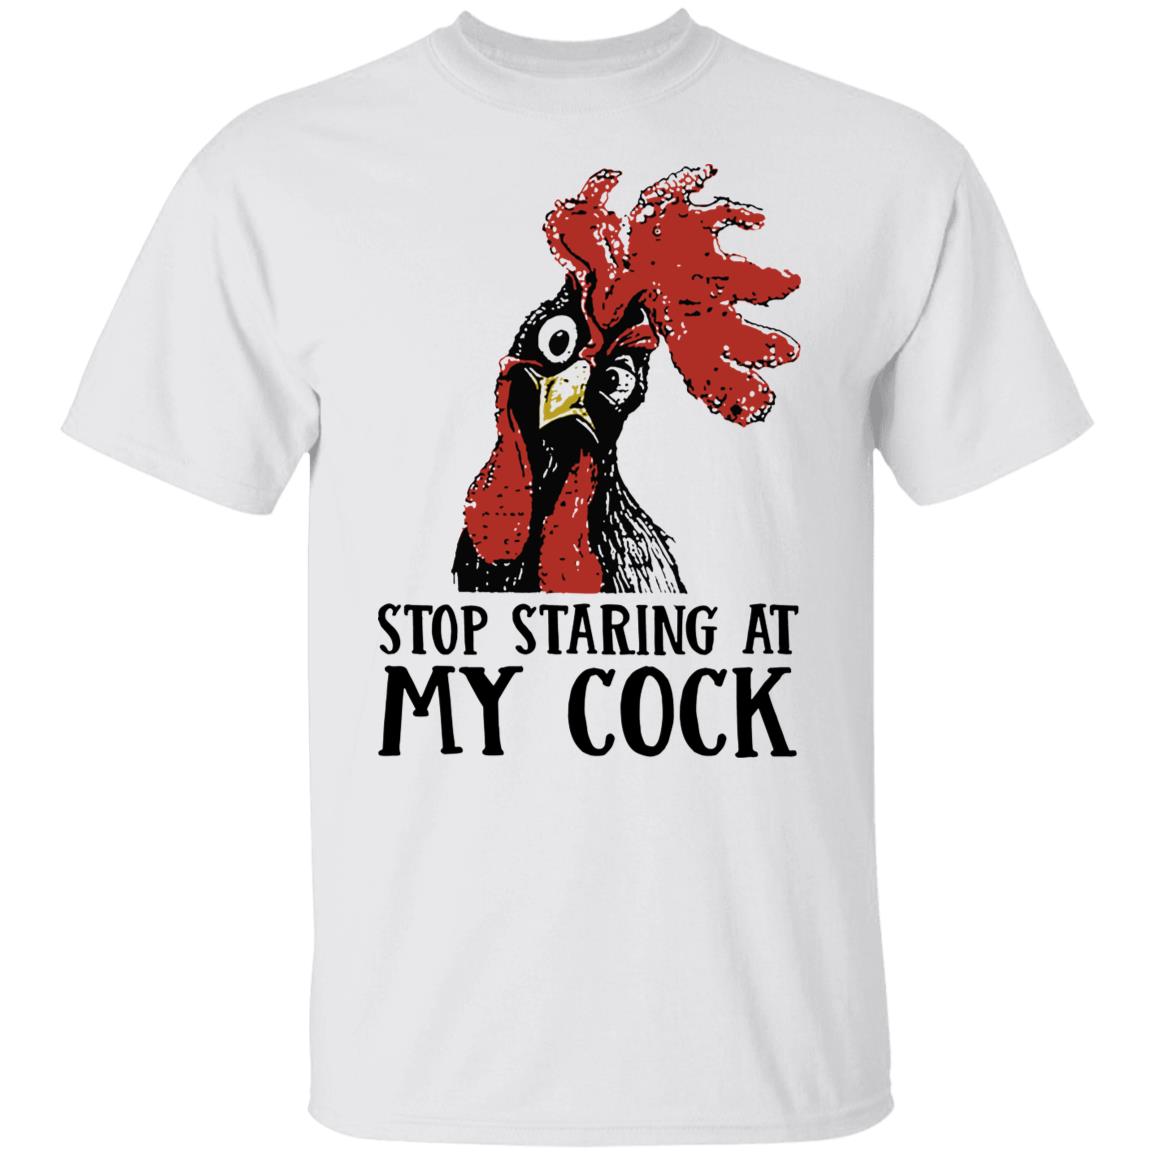 Stop Staring at My Cock Funny Chicken Shirt